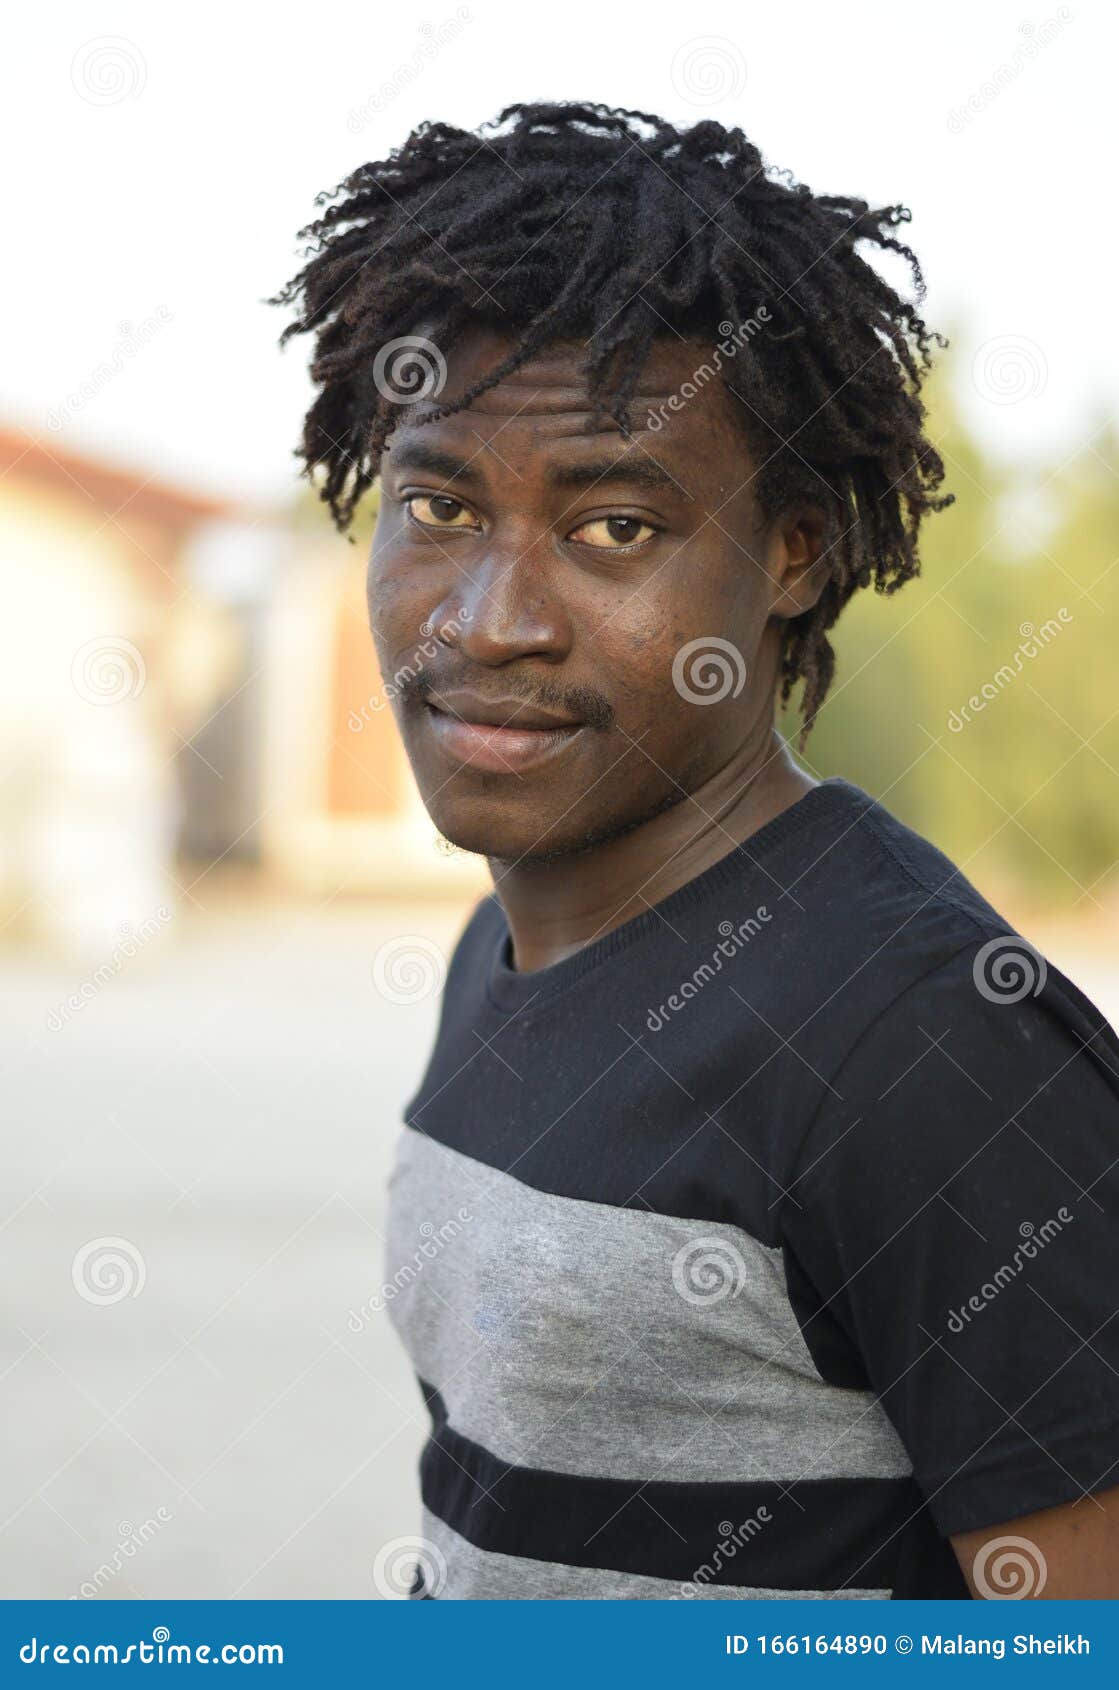 A Dark Skin Handsome African Boy Stock Photo - Image of style, african:  166164890